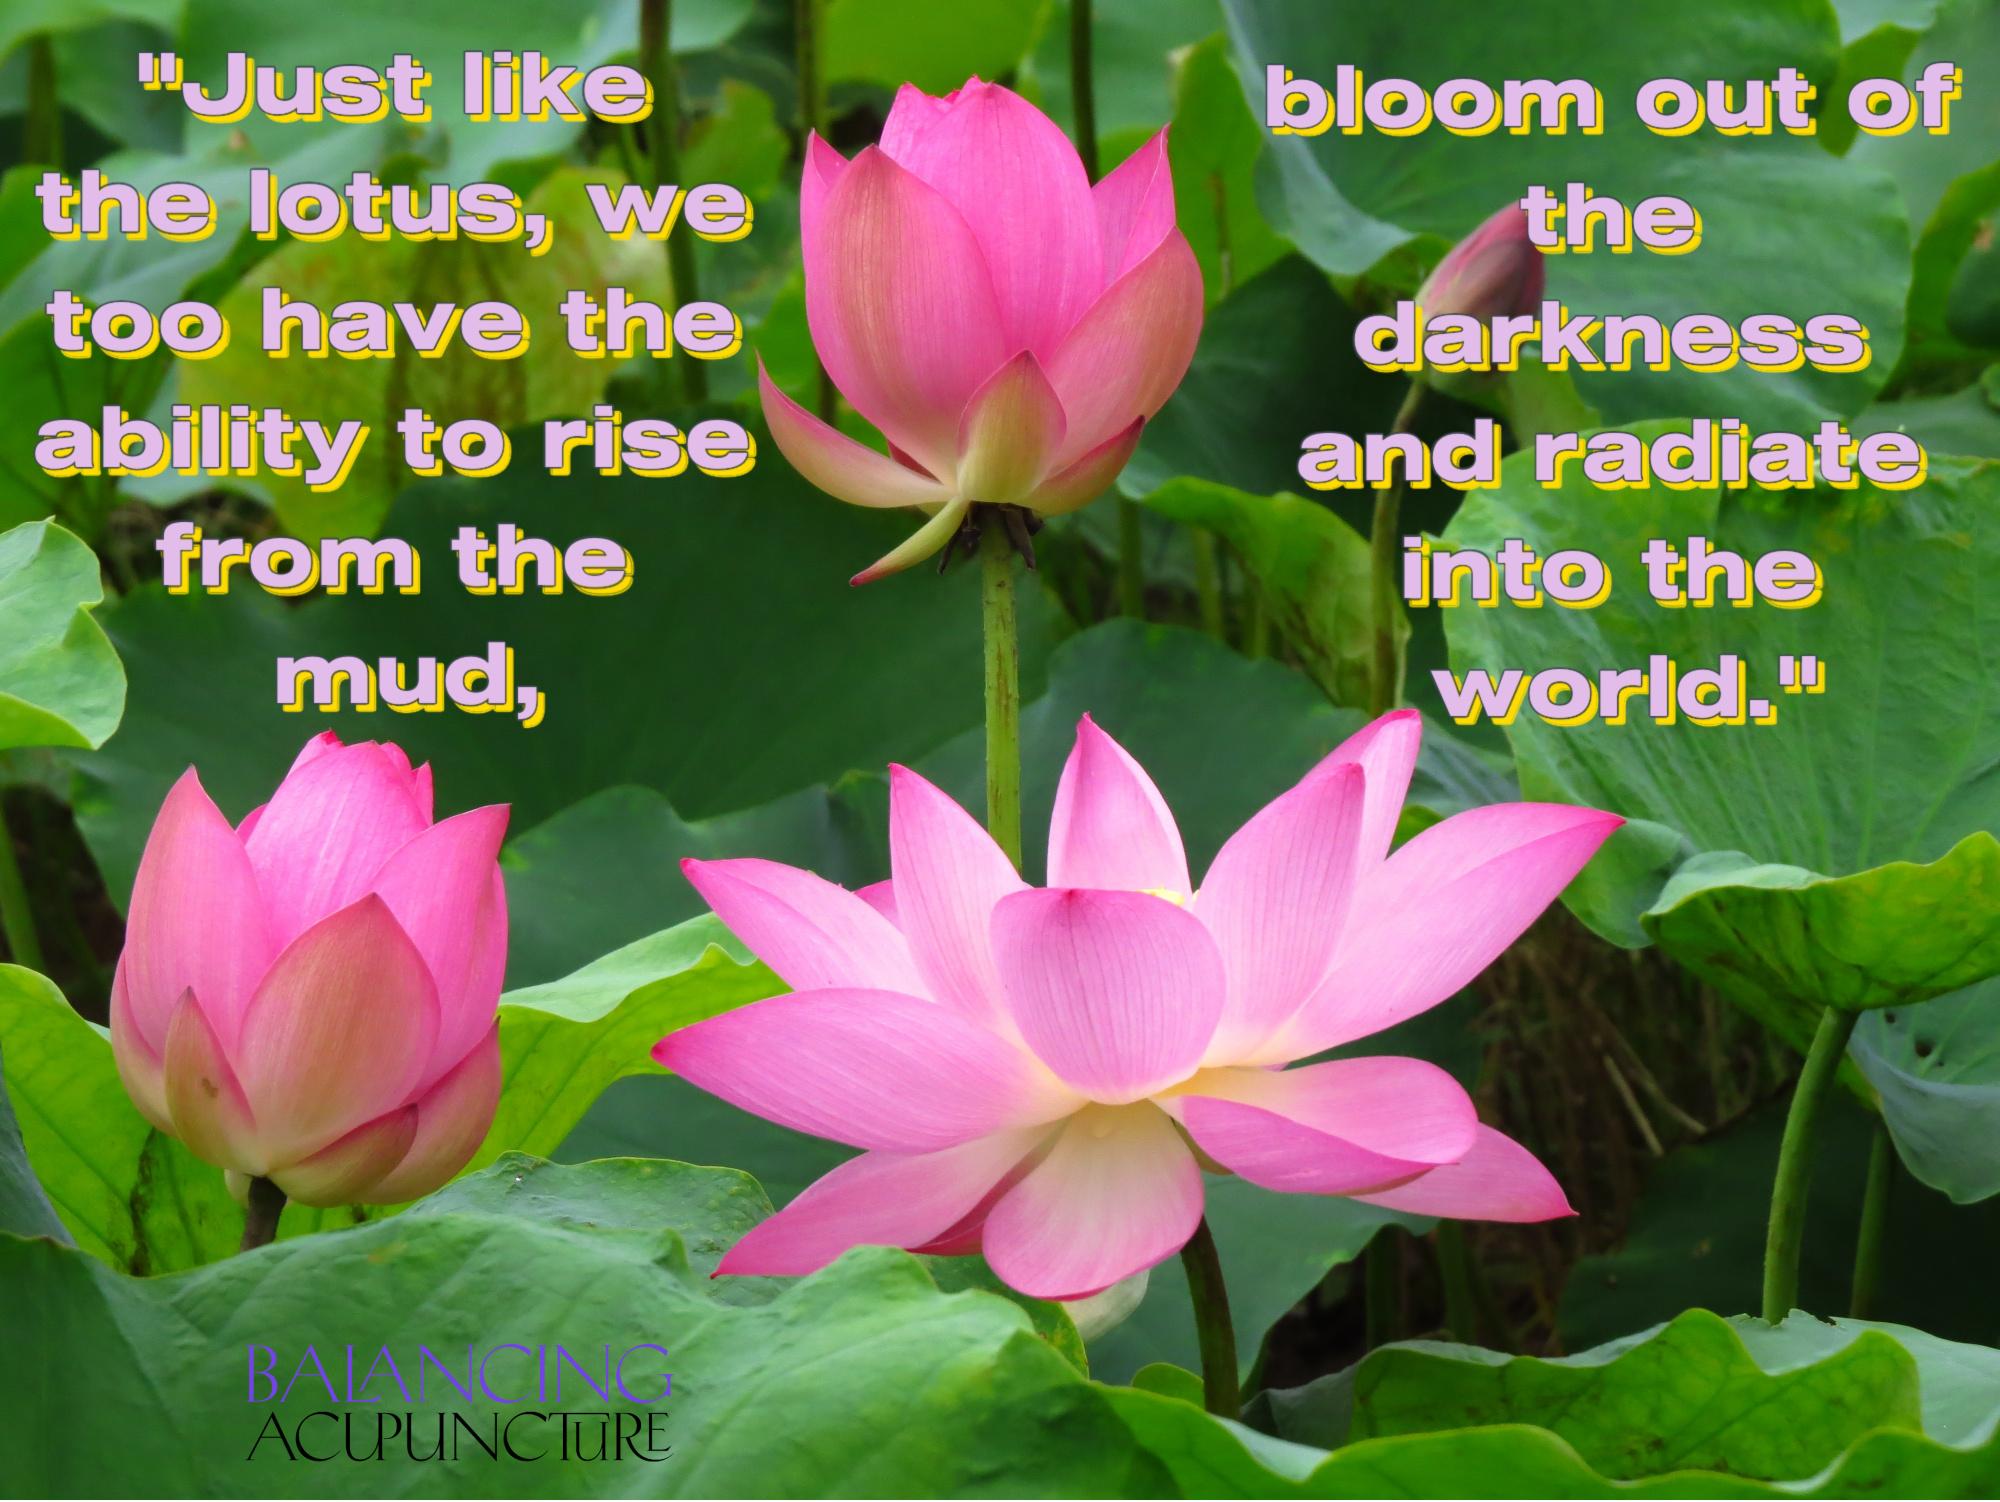 Just like the lotus we too have the ability to rise from the mud bloom out of the darkness and radiate into the worldjpg